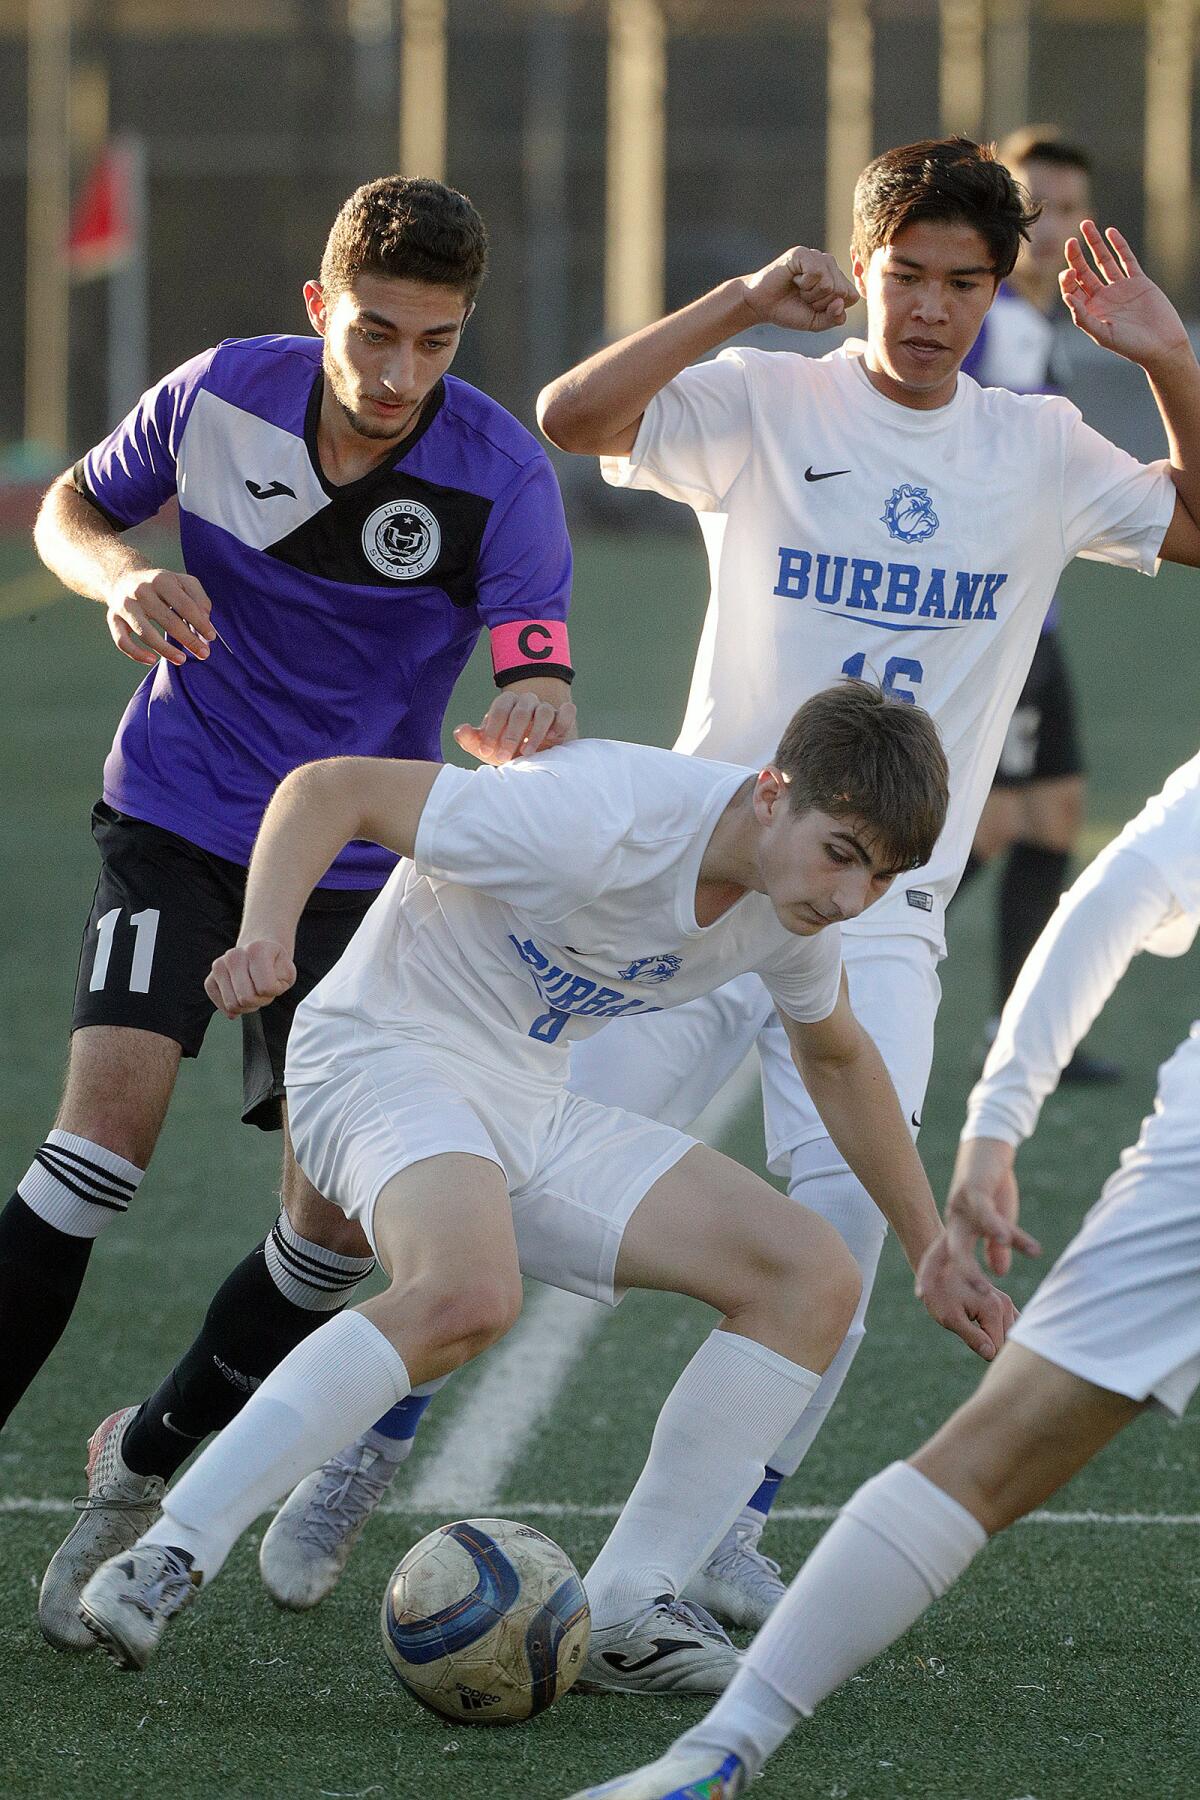 Burbank’s Garik Kirahosyan (in front) seemingly sneaks in from the side to take the ball off the foot of Hoover’s Kevin Mirzakhanian who was being pursued by Burbank’s Freddy Cardenas in a Pacific League boys' soccer game at Hoover High School on Friday, January 3, 2020.